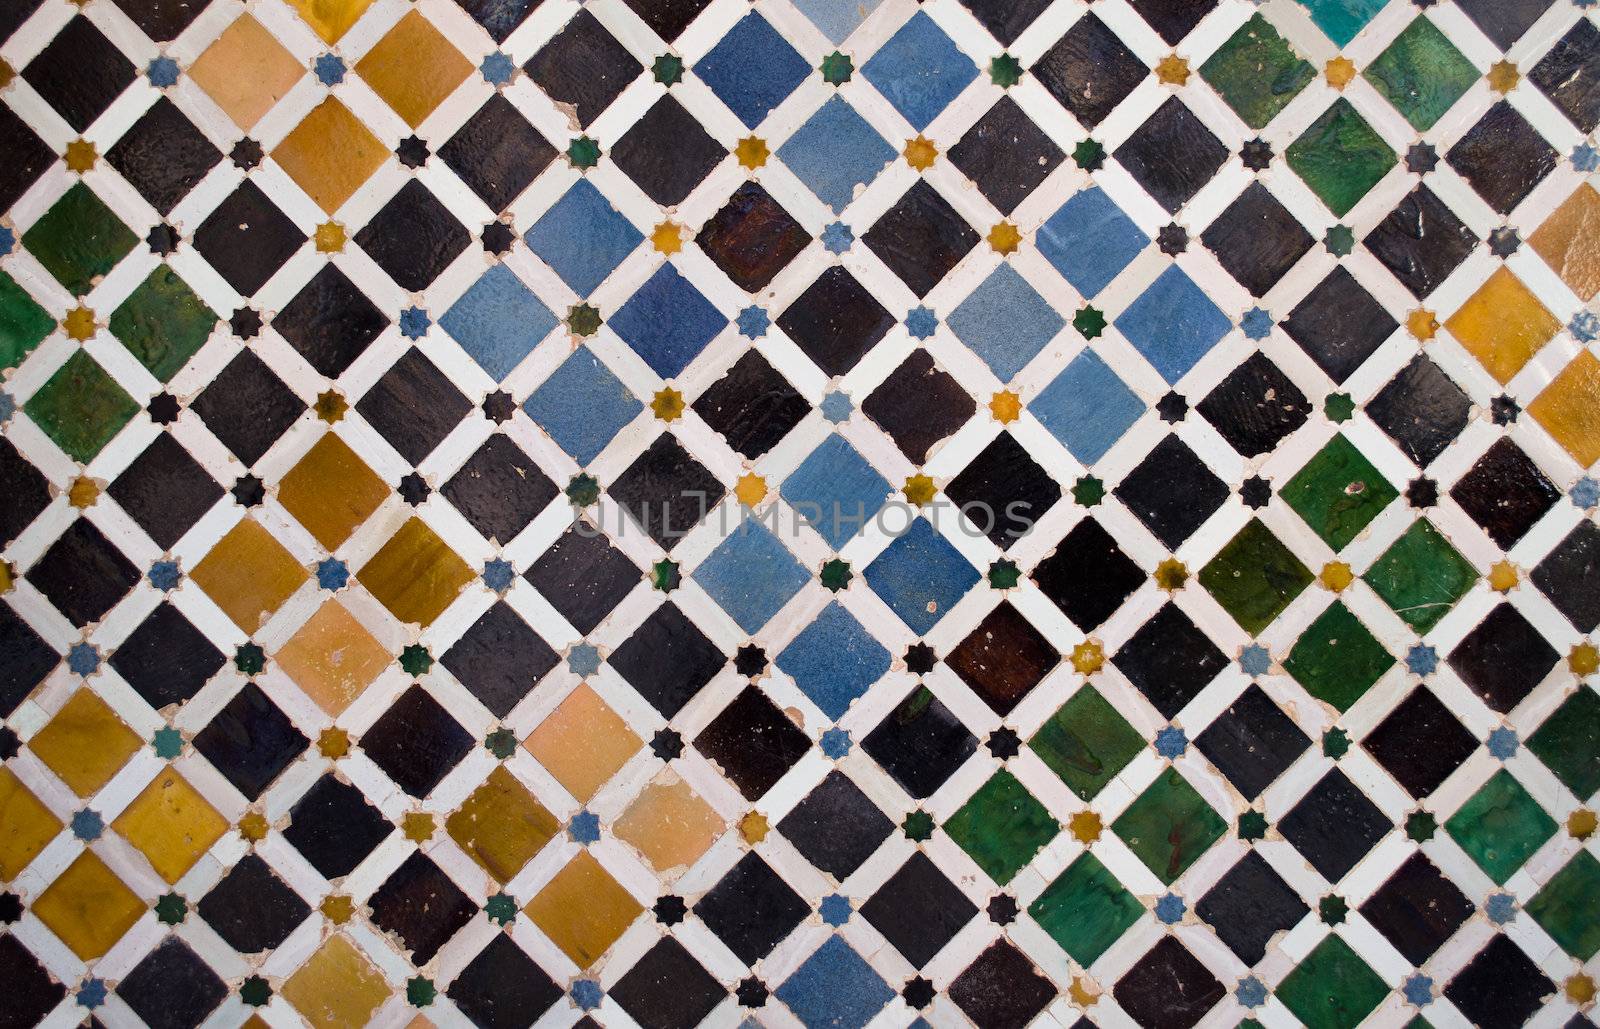 Pattern or texture of ceramic tiles mosaic found in the Alhambra, in Spain